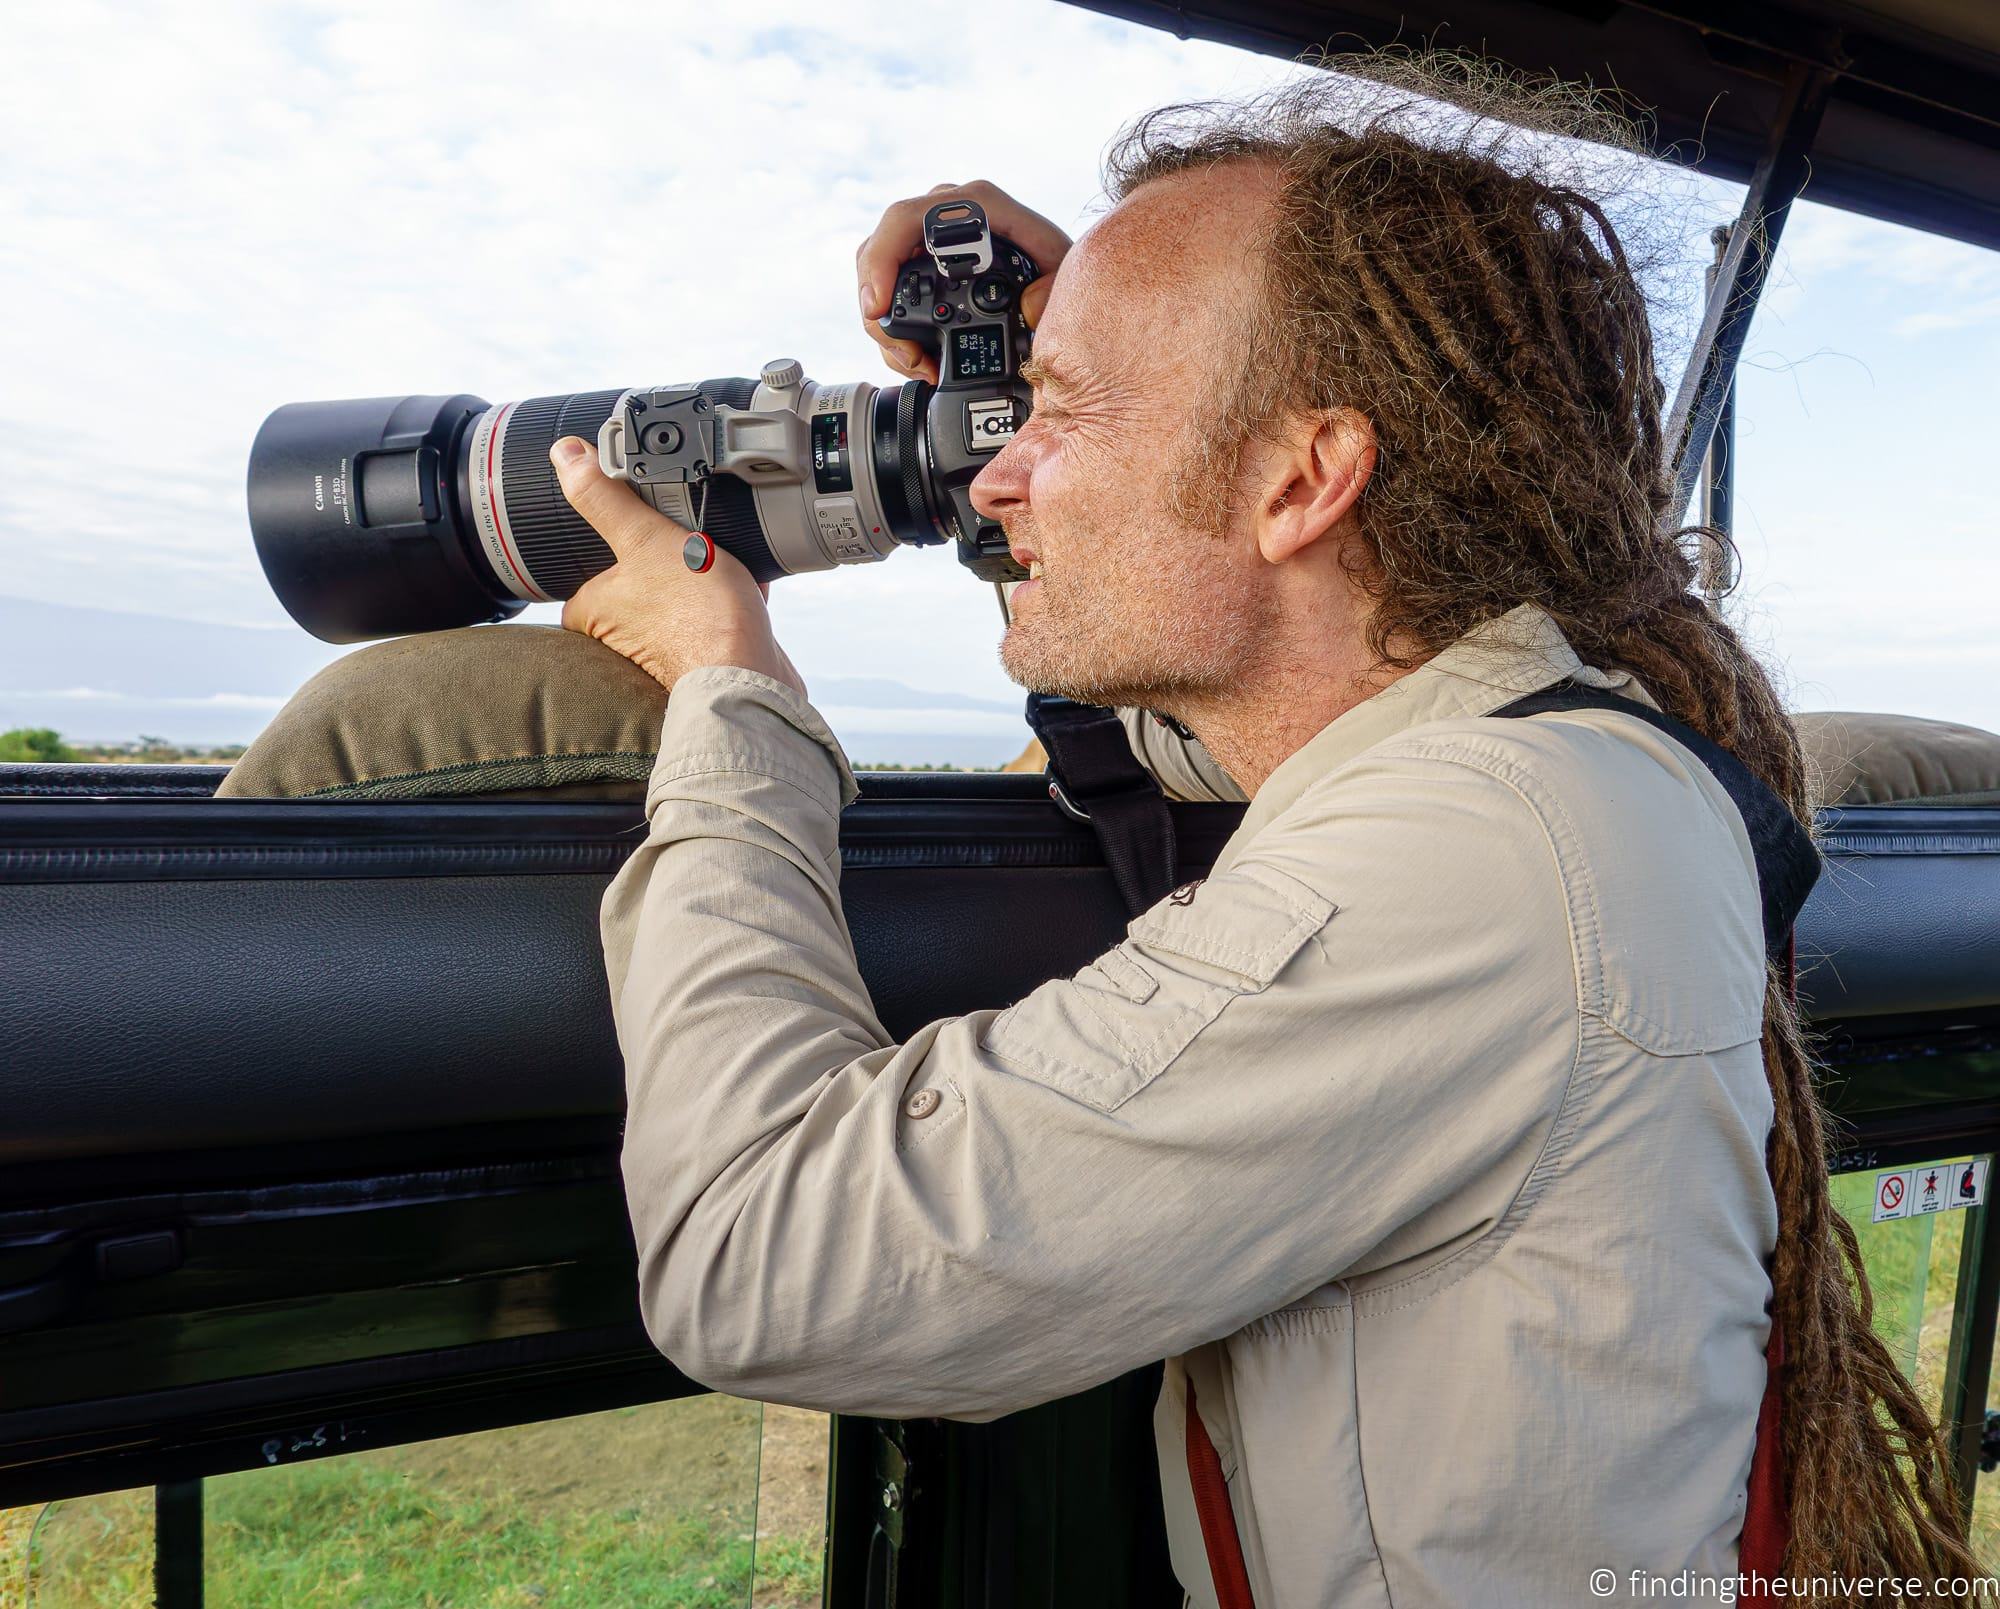 Laurence using R5 on safari in Africa